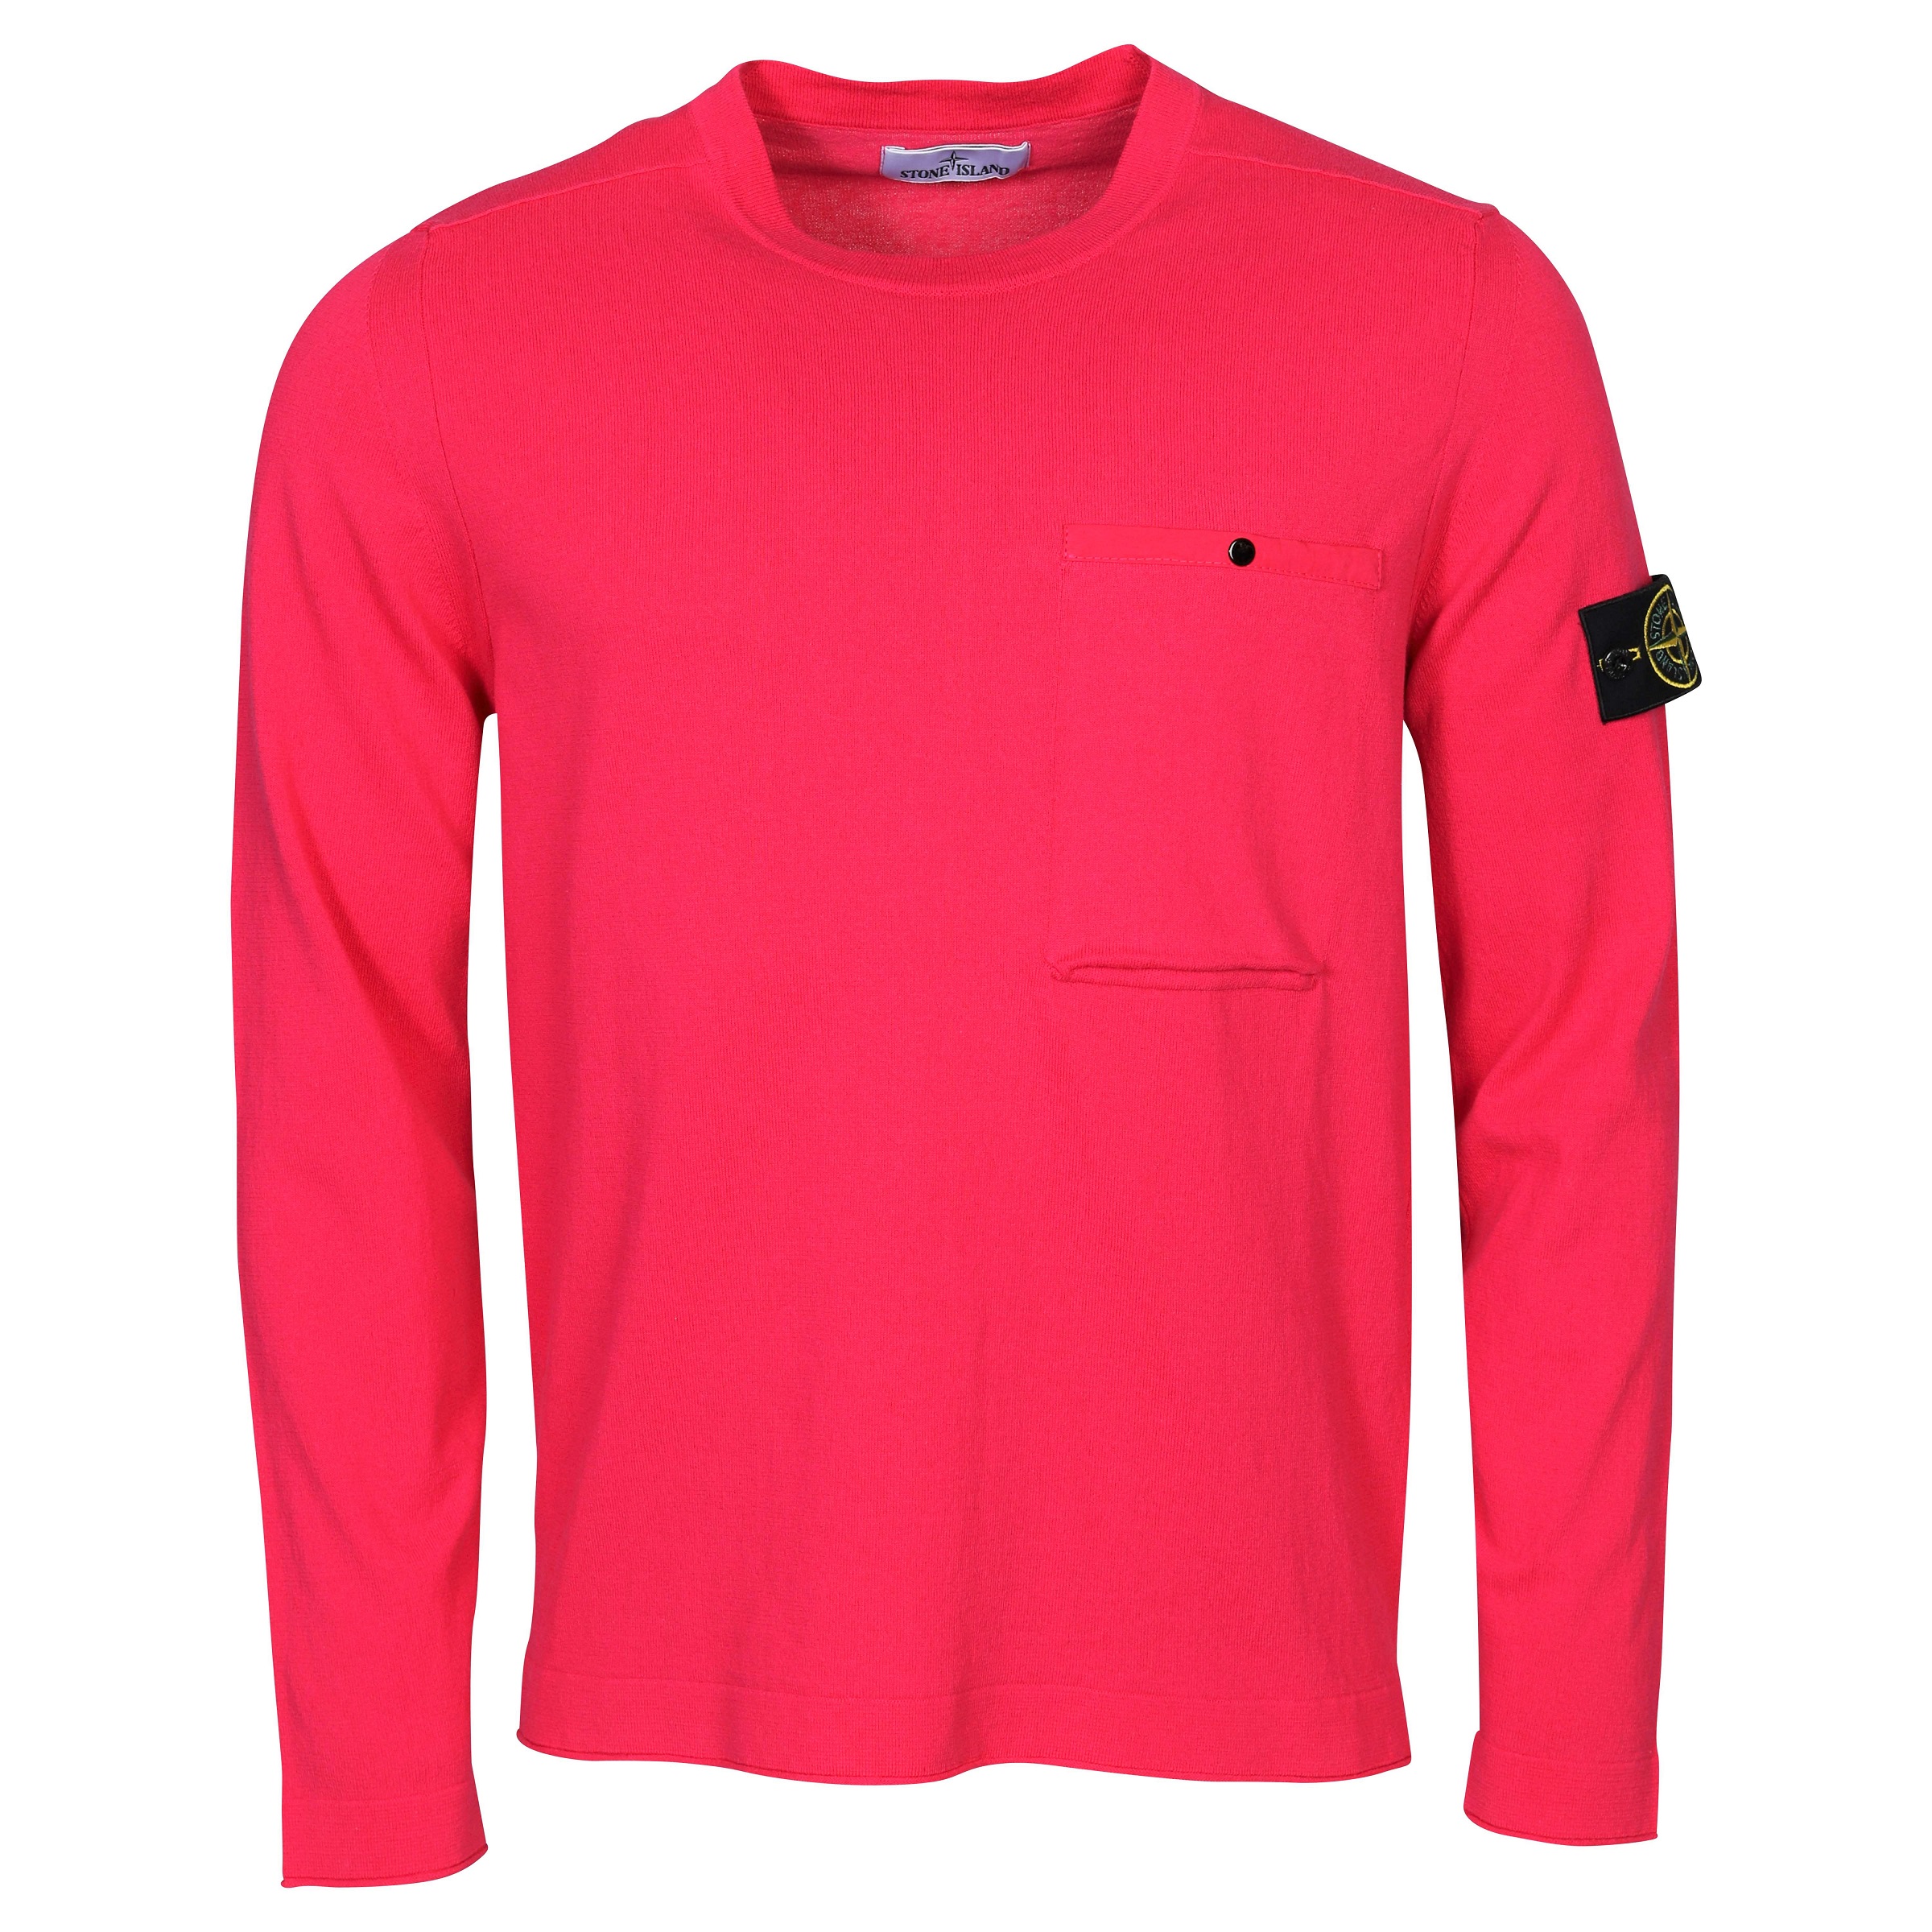 Stone Island Chest Pocket Knit Sweater in Pink S